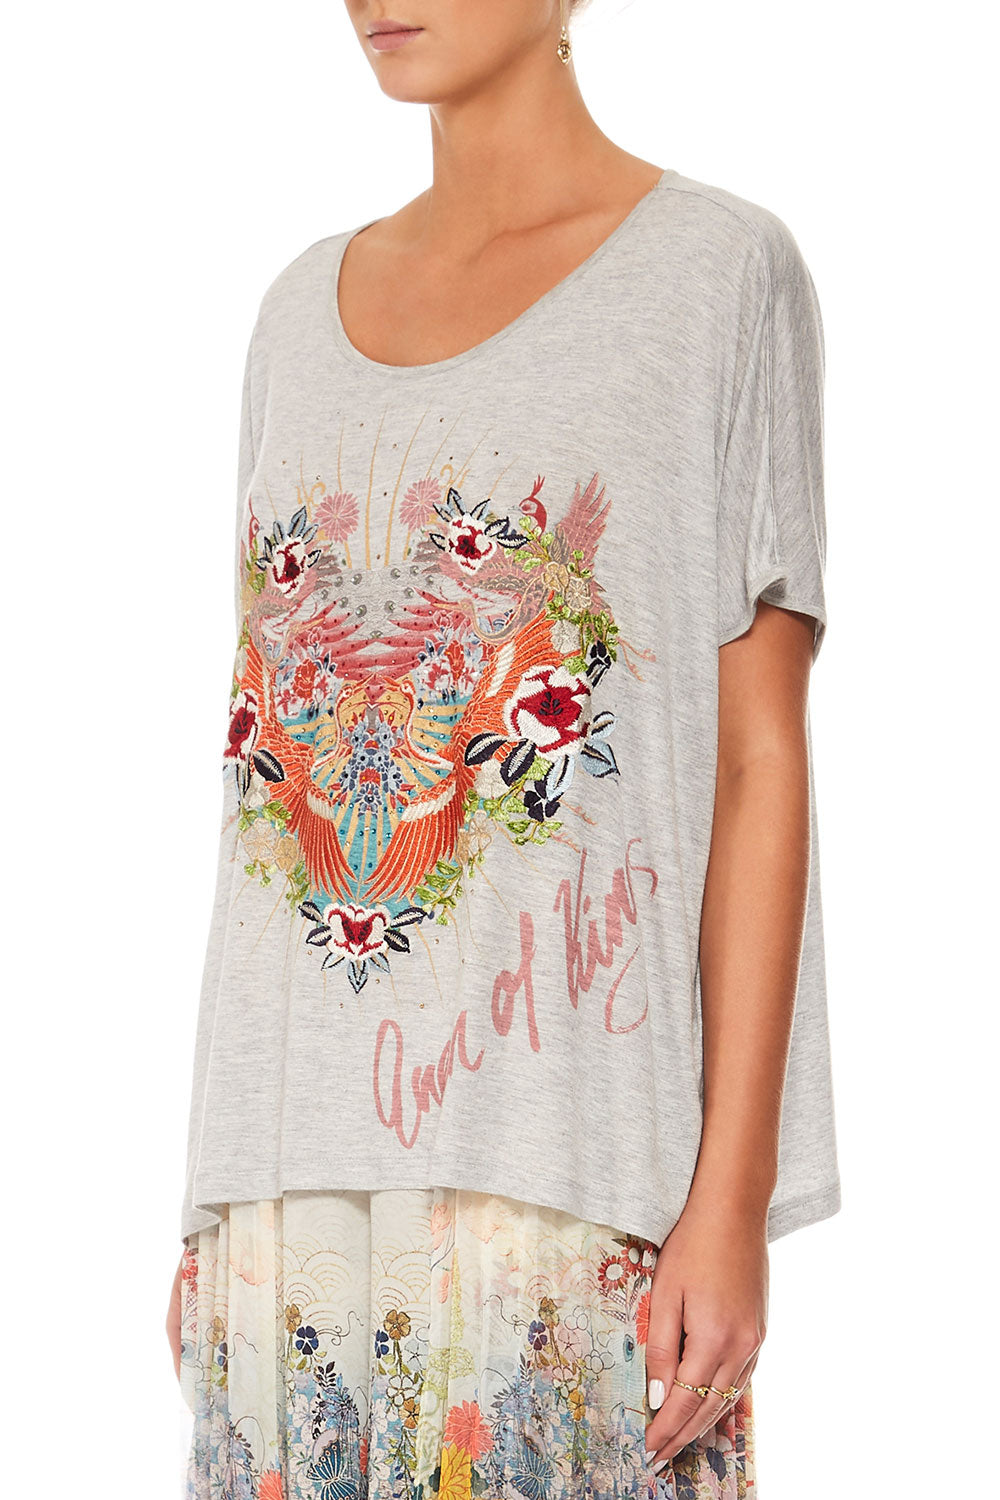 CAMILLA LADY LABRYINTH LOOSE FIT ROUND NECK TEE